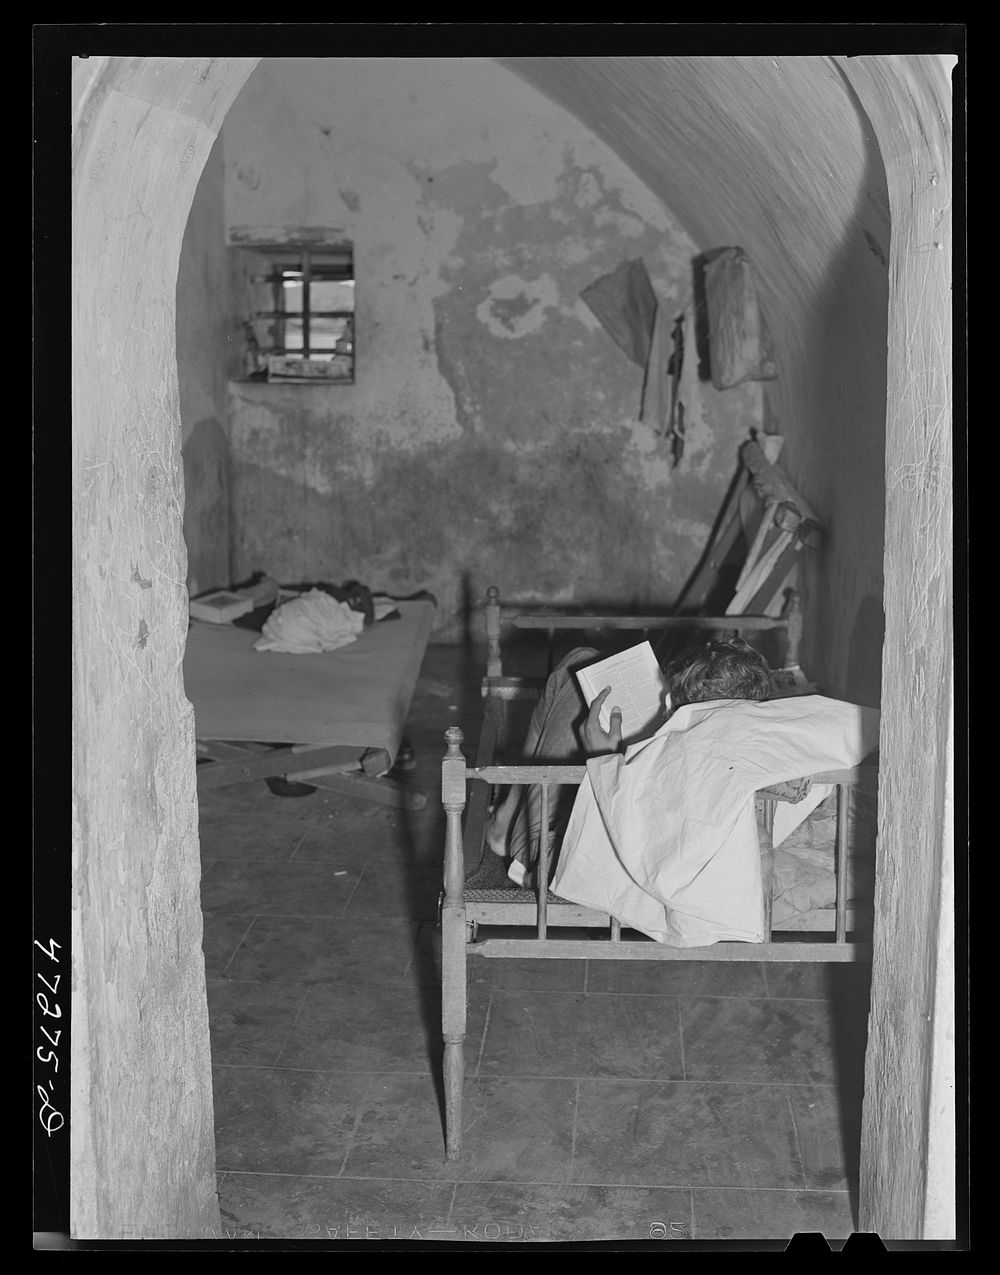 Charlotte Amalie, Saint Thomas Island, Virgin Islands. One of the cells in the old fort, now used as a prison. Sourced from…